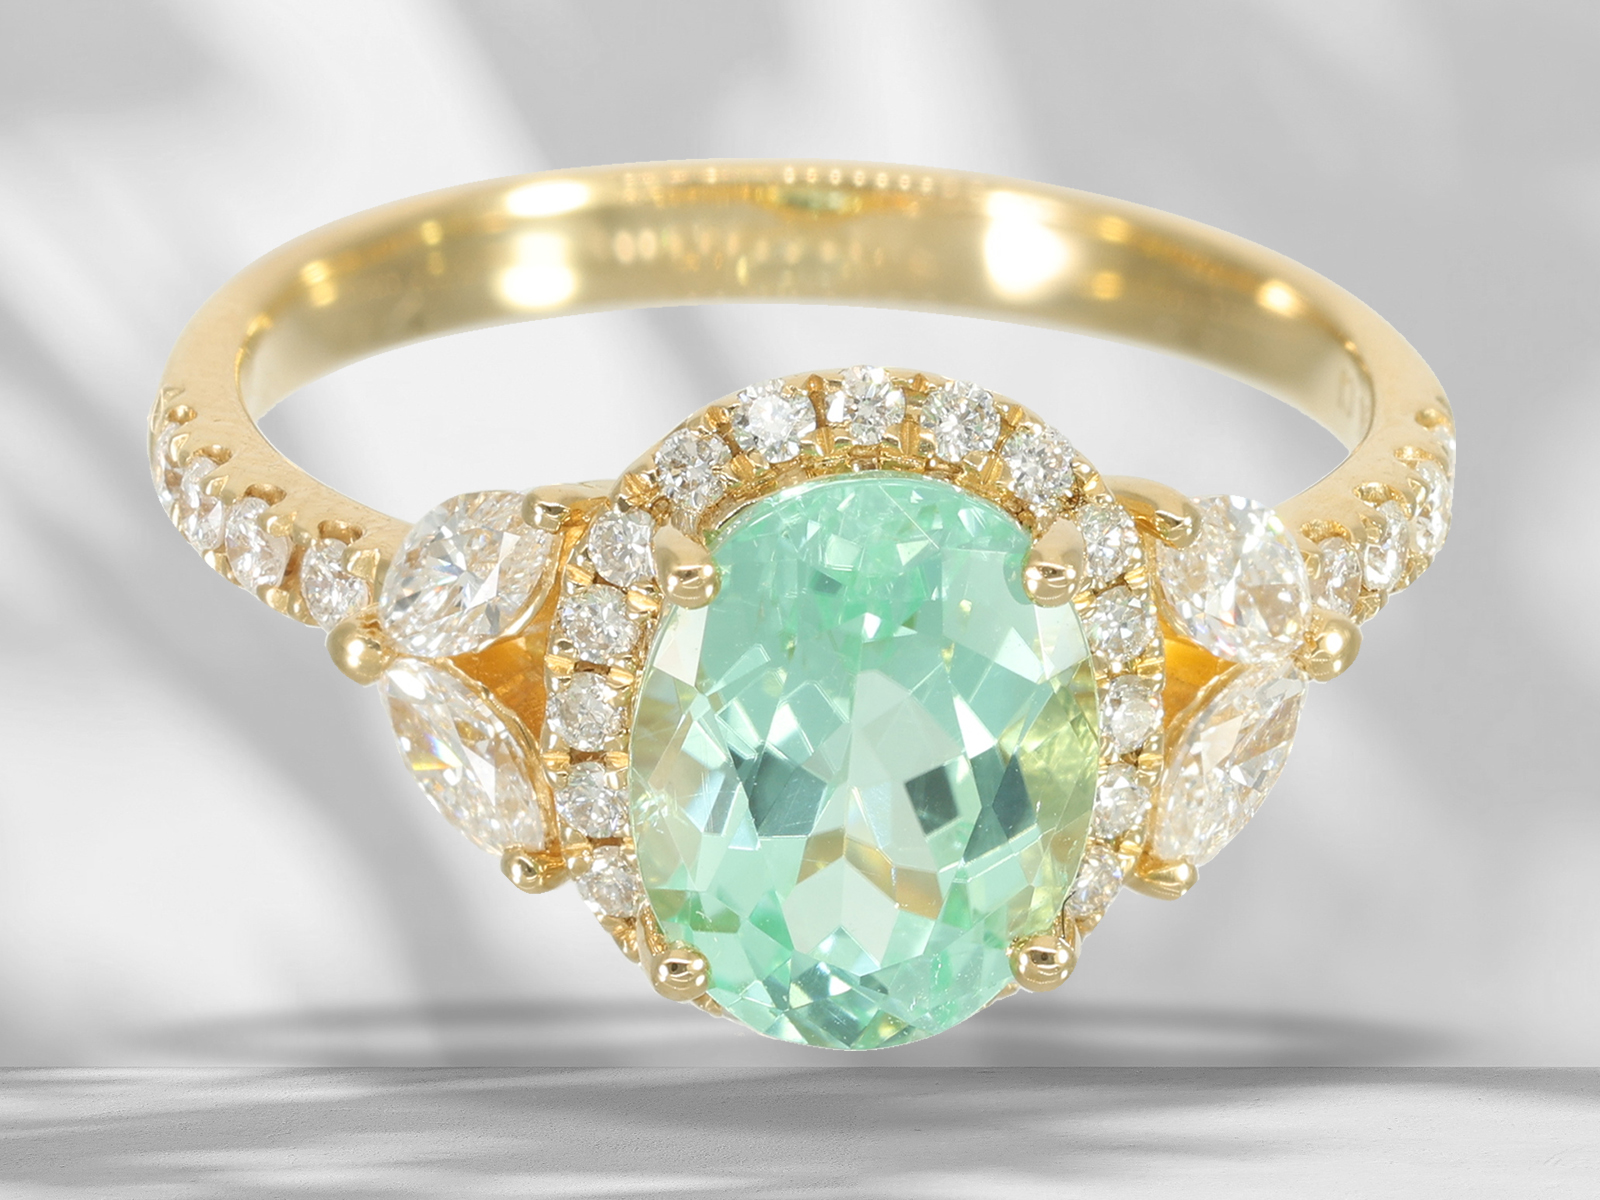 Ring: goldsmith ring with extremely rare Paraiba tourmaline and brilliant-cut diamonds, like new - Image 4 of 6